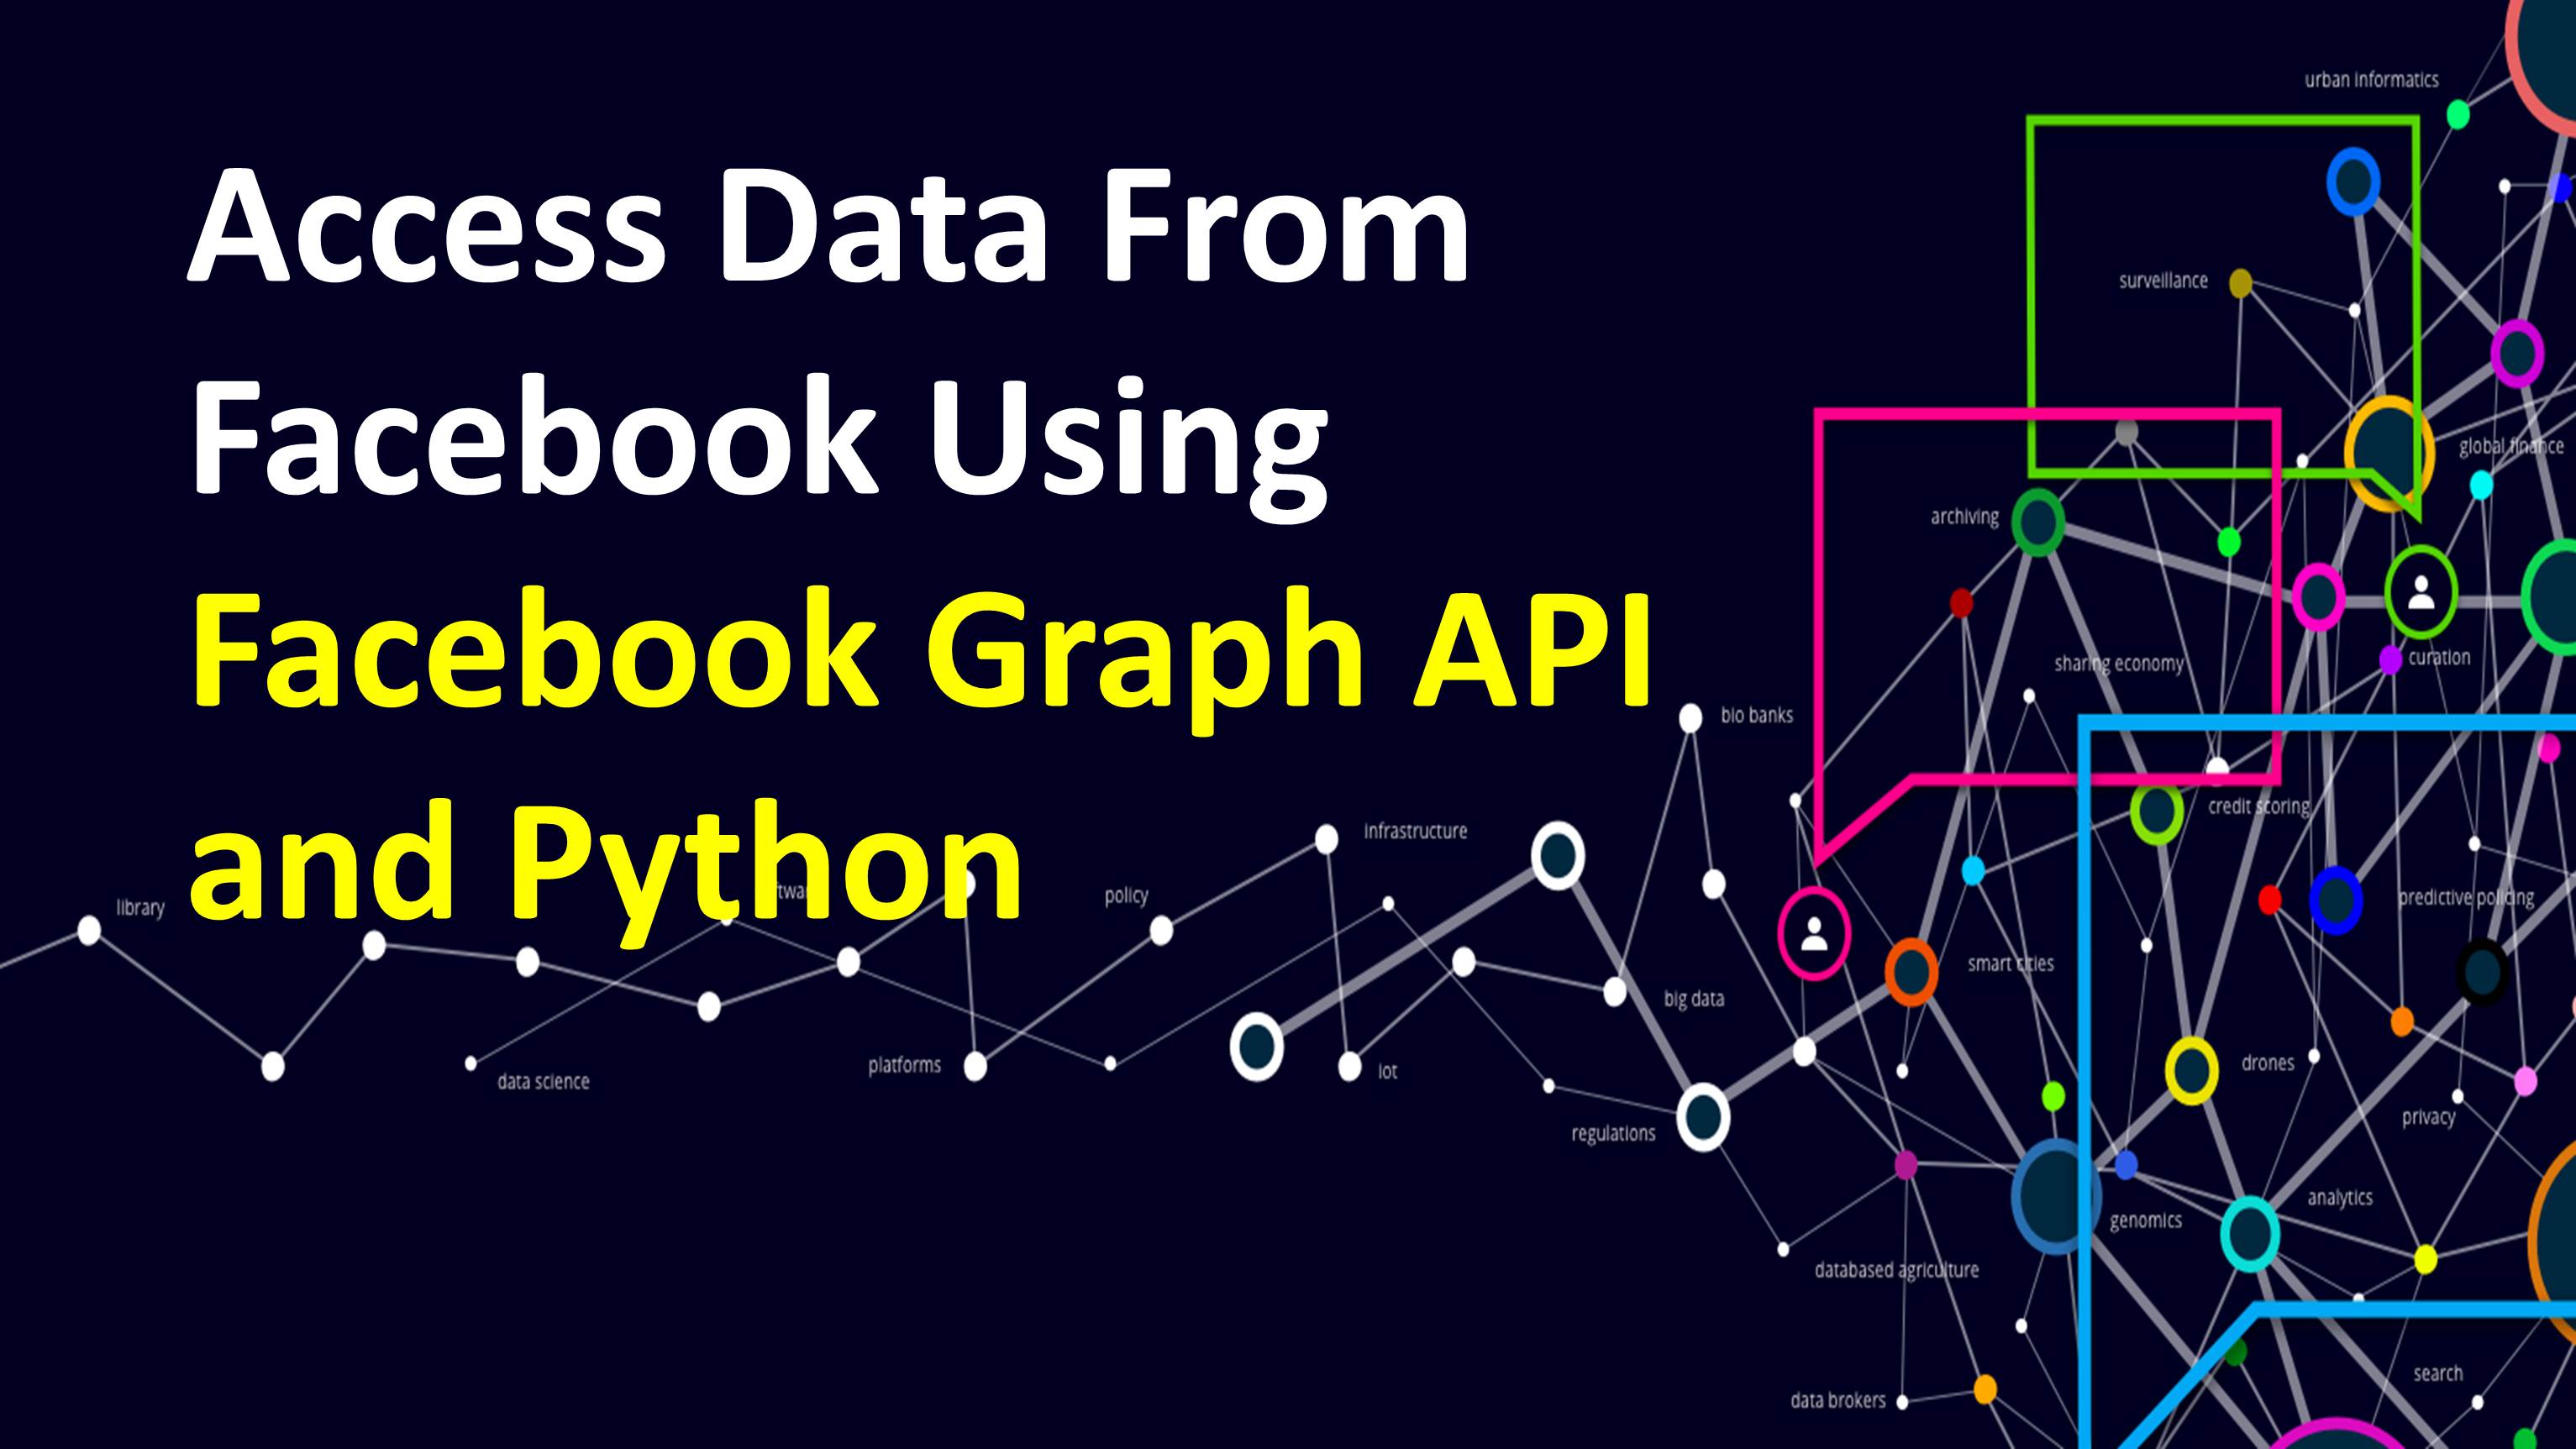 Access Data From Facebook Using Facebook Graph API and Python